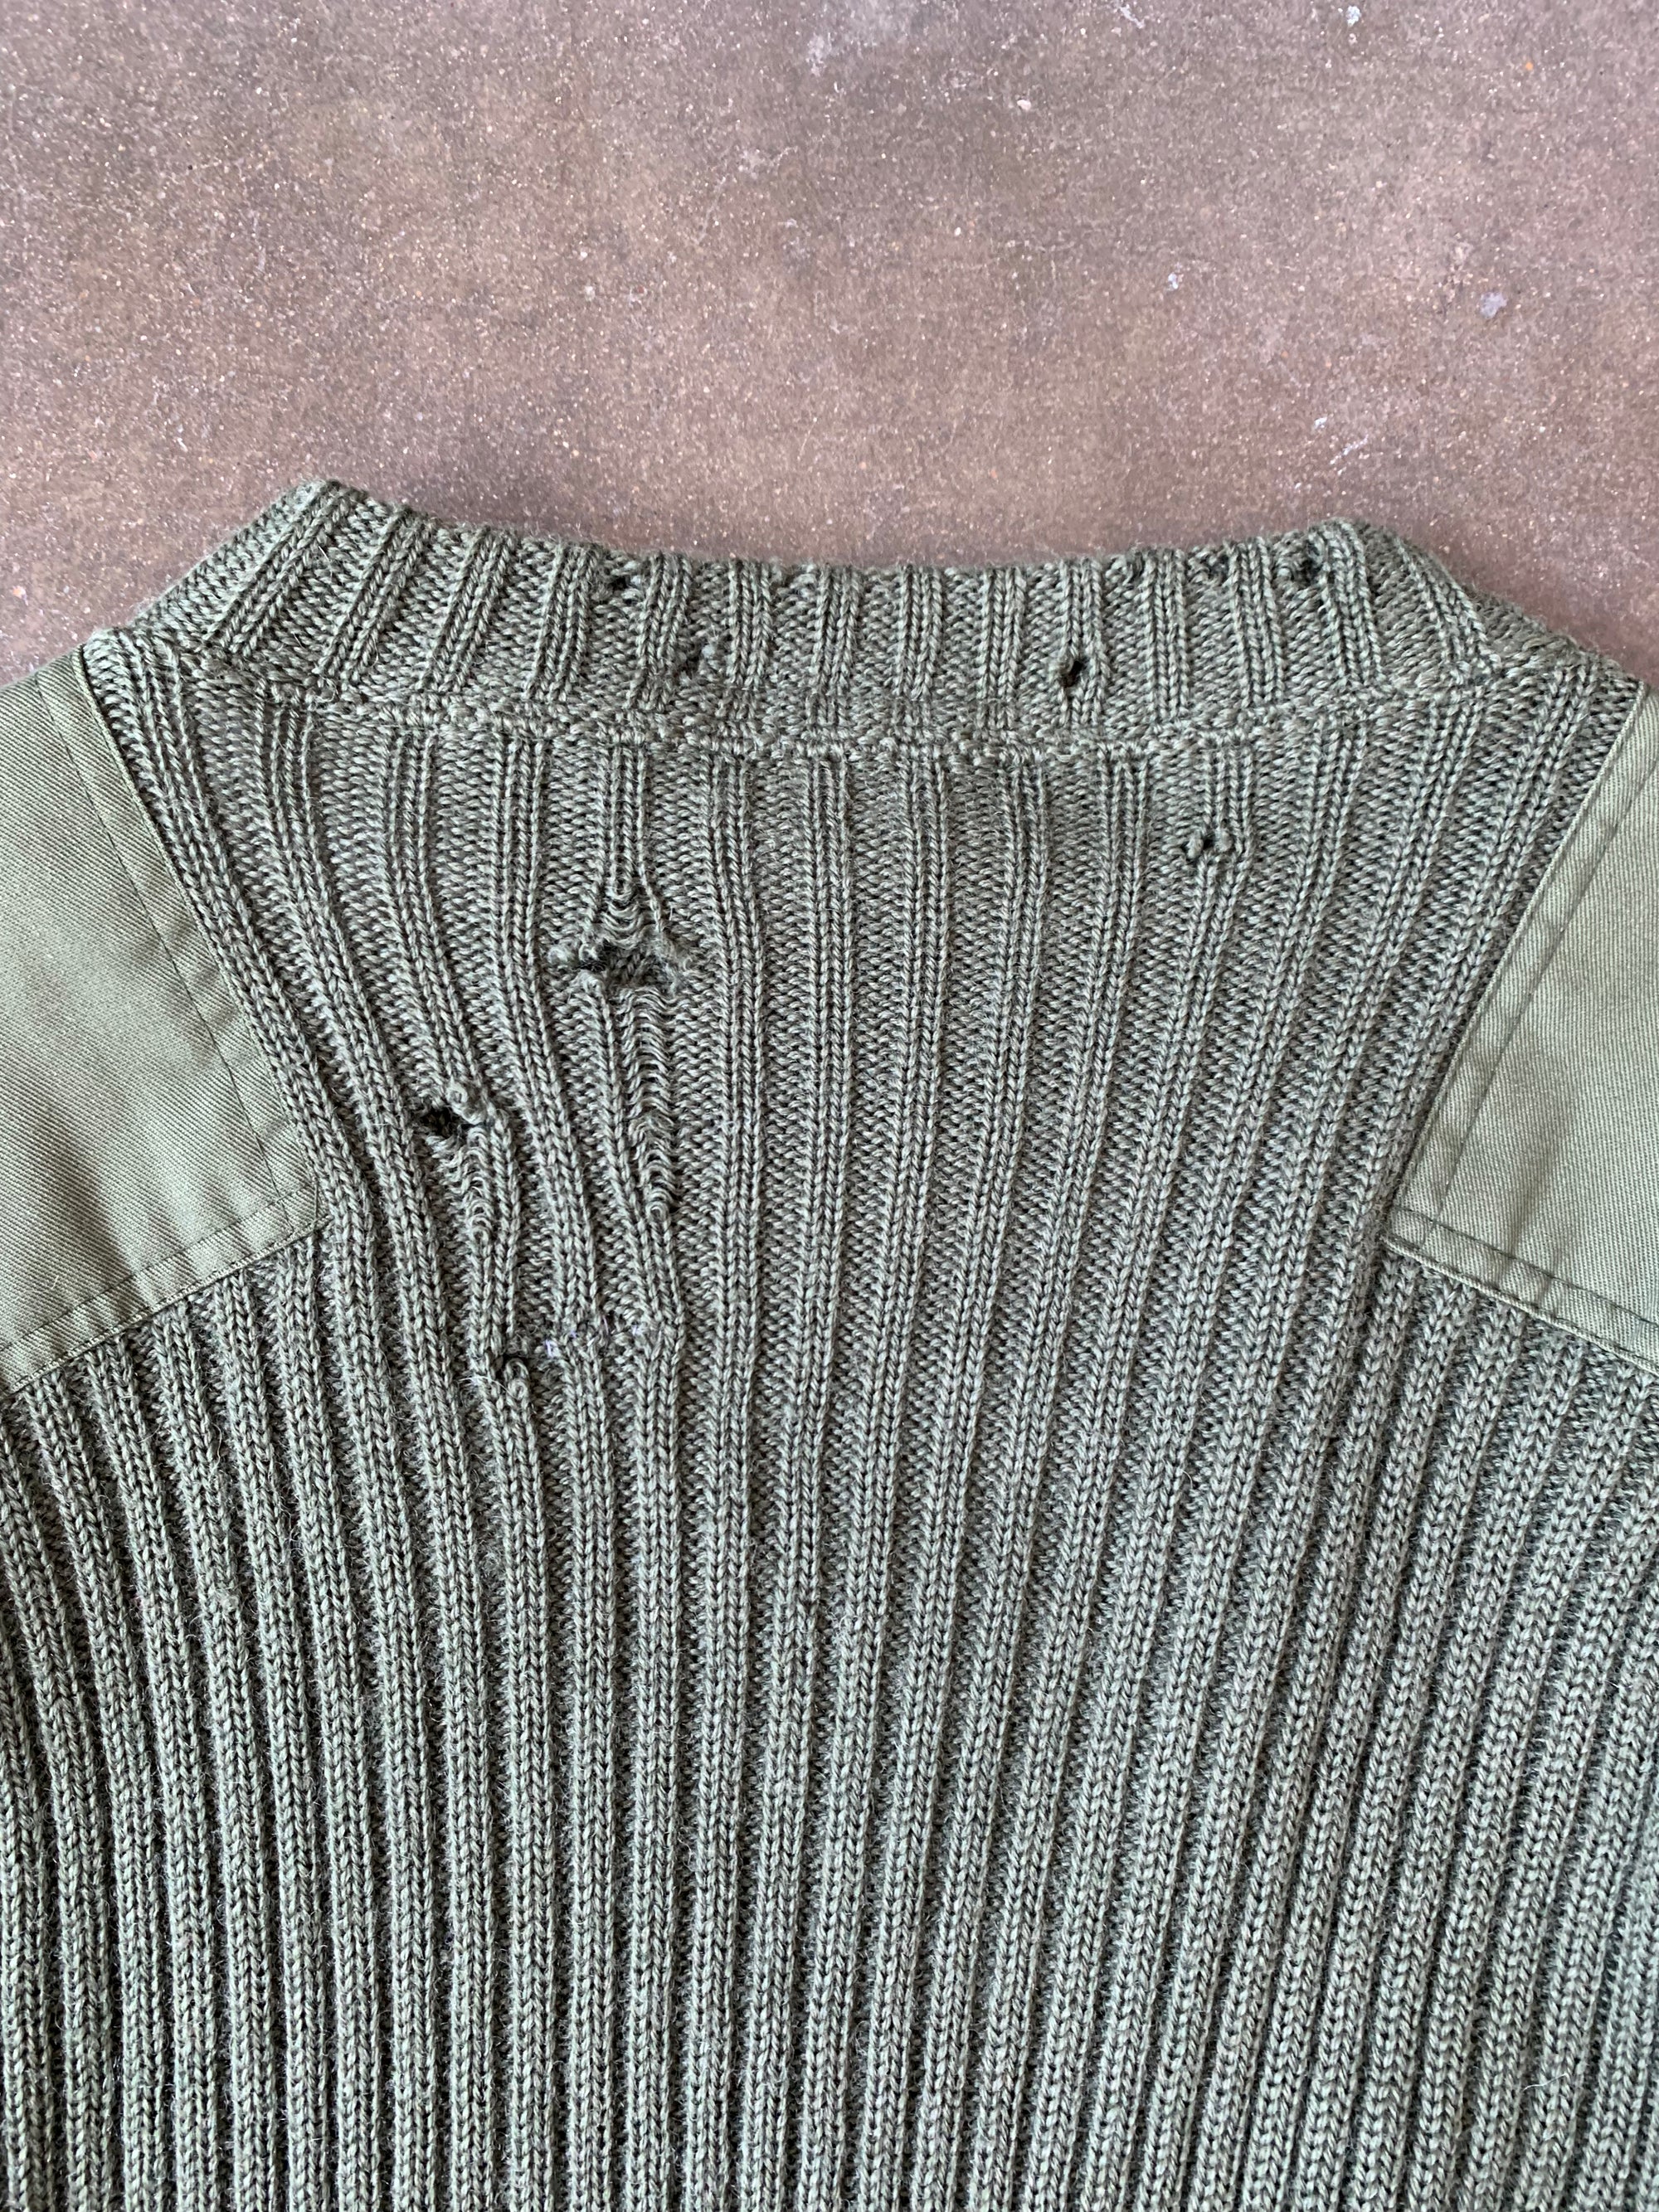 Vintage Military Issue Green Wool Sweater